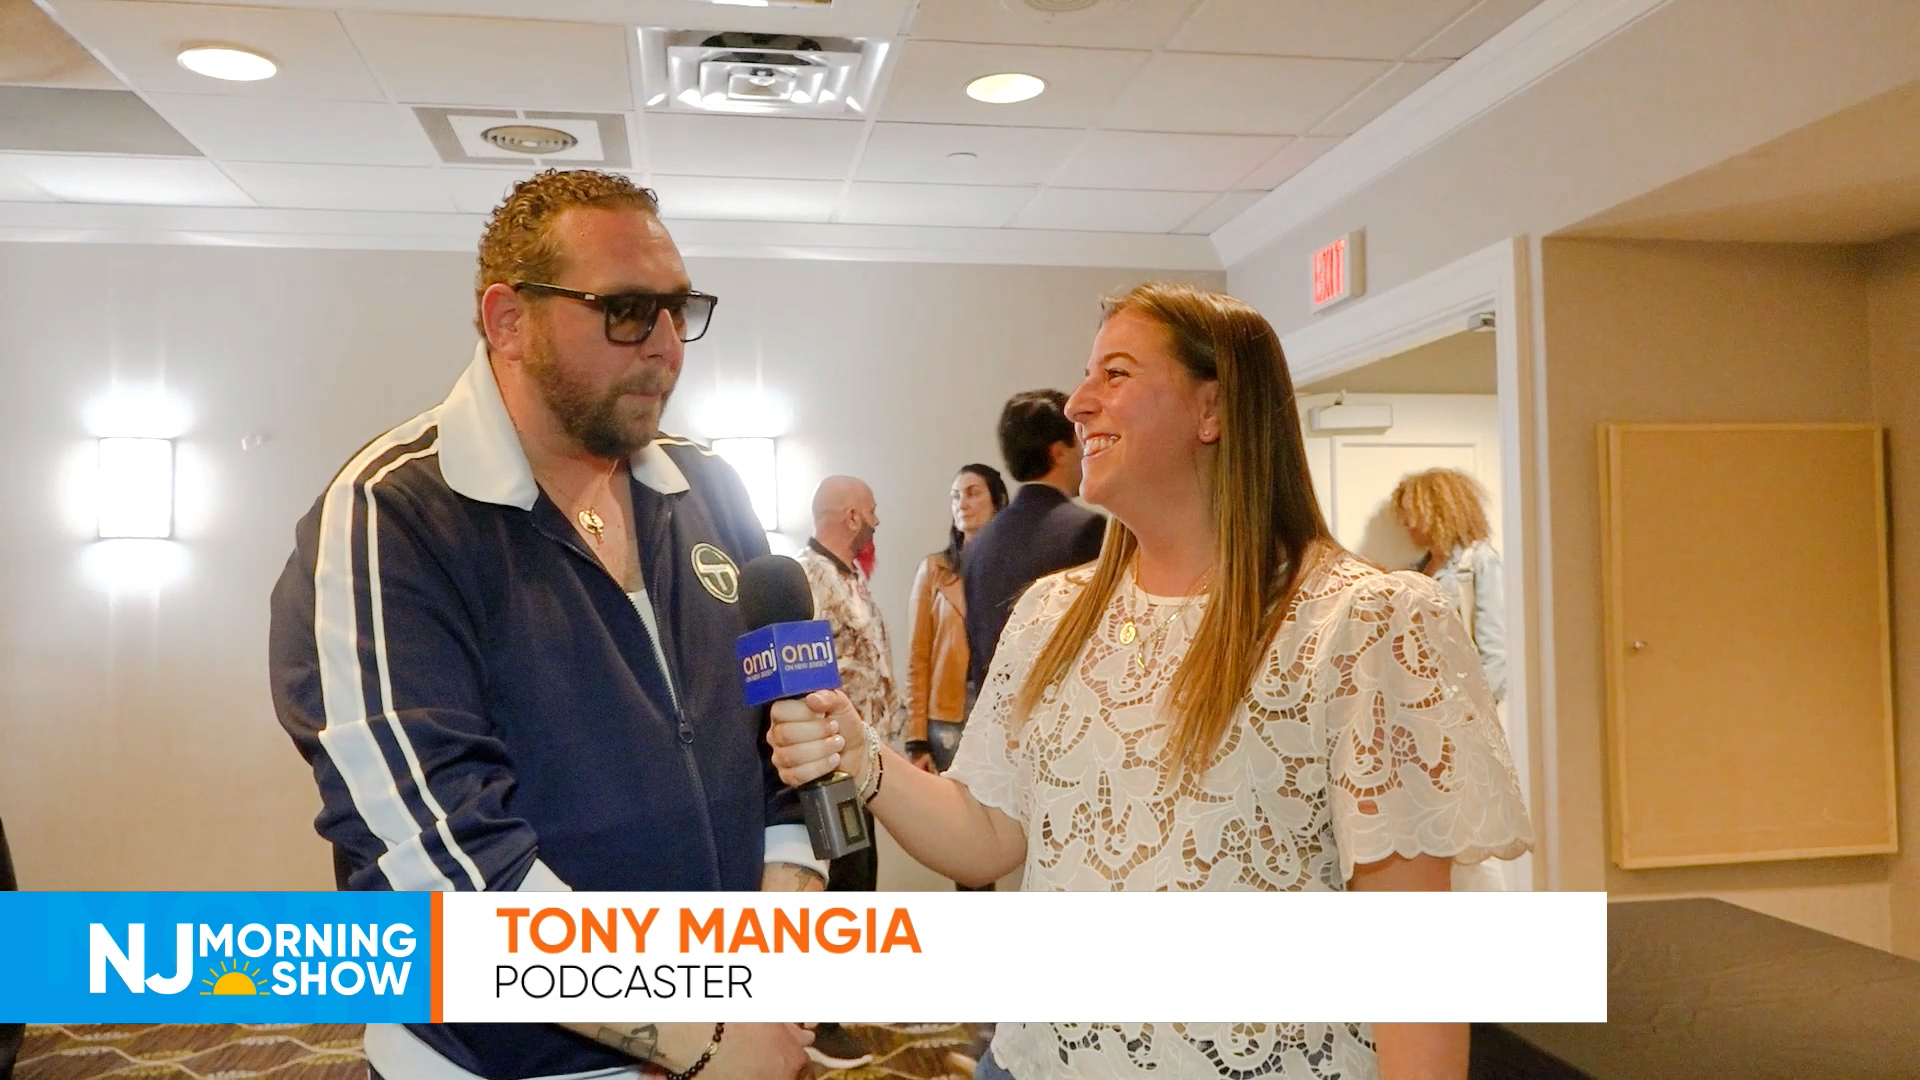 NJ Morning Show – Interview with Tony Mangia at Paisan Con